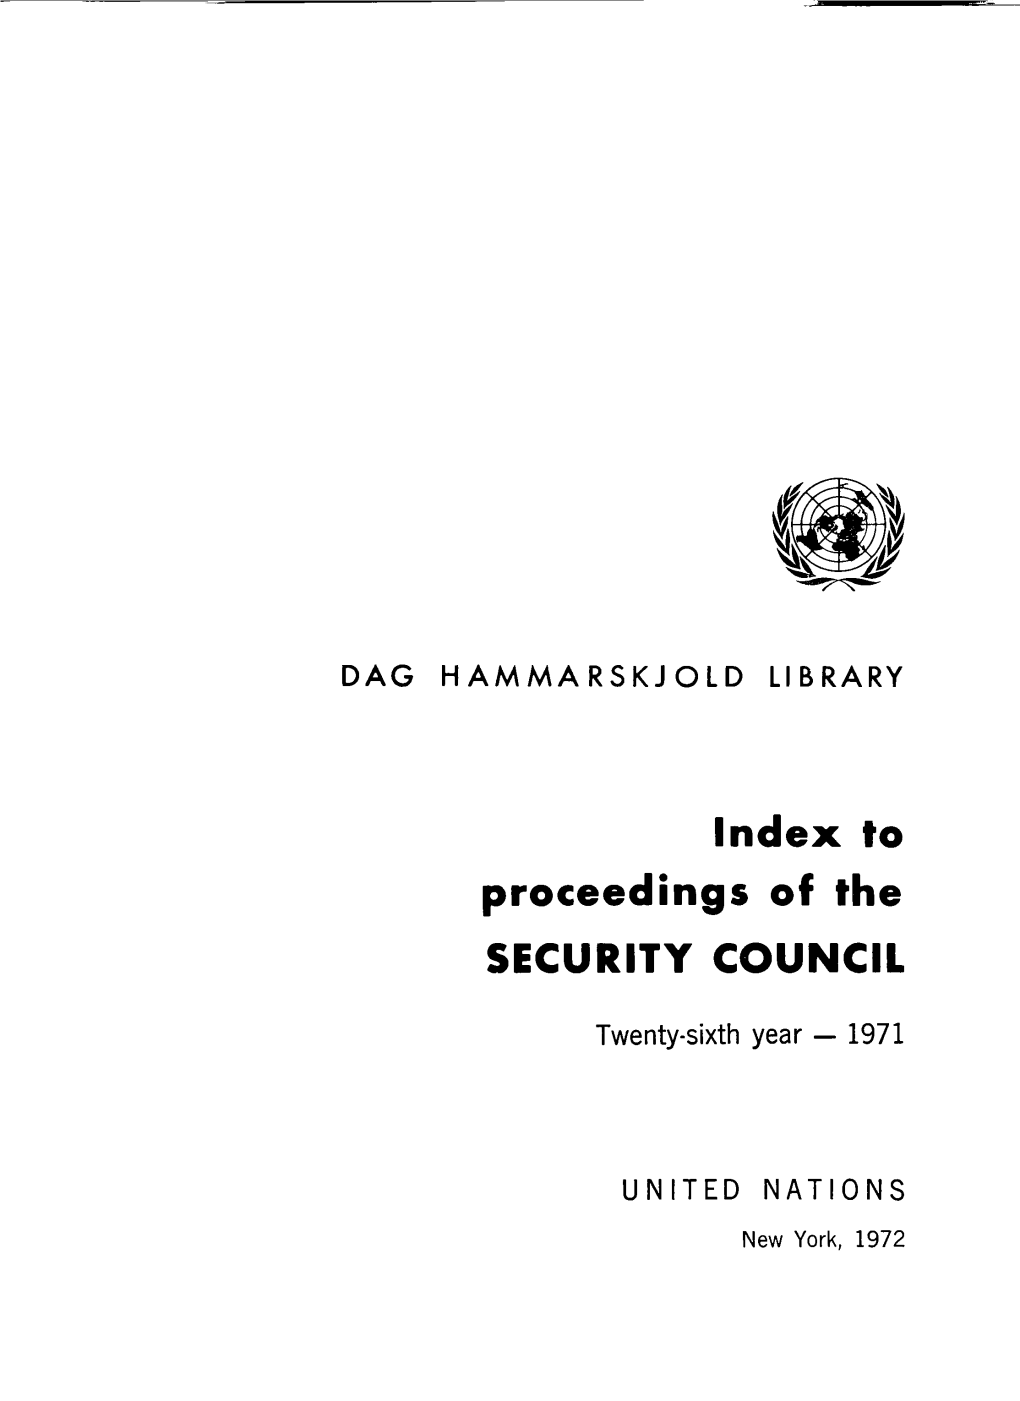 To Proceedings of the Security Council, Twenty-Sixth